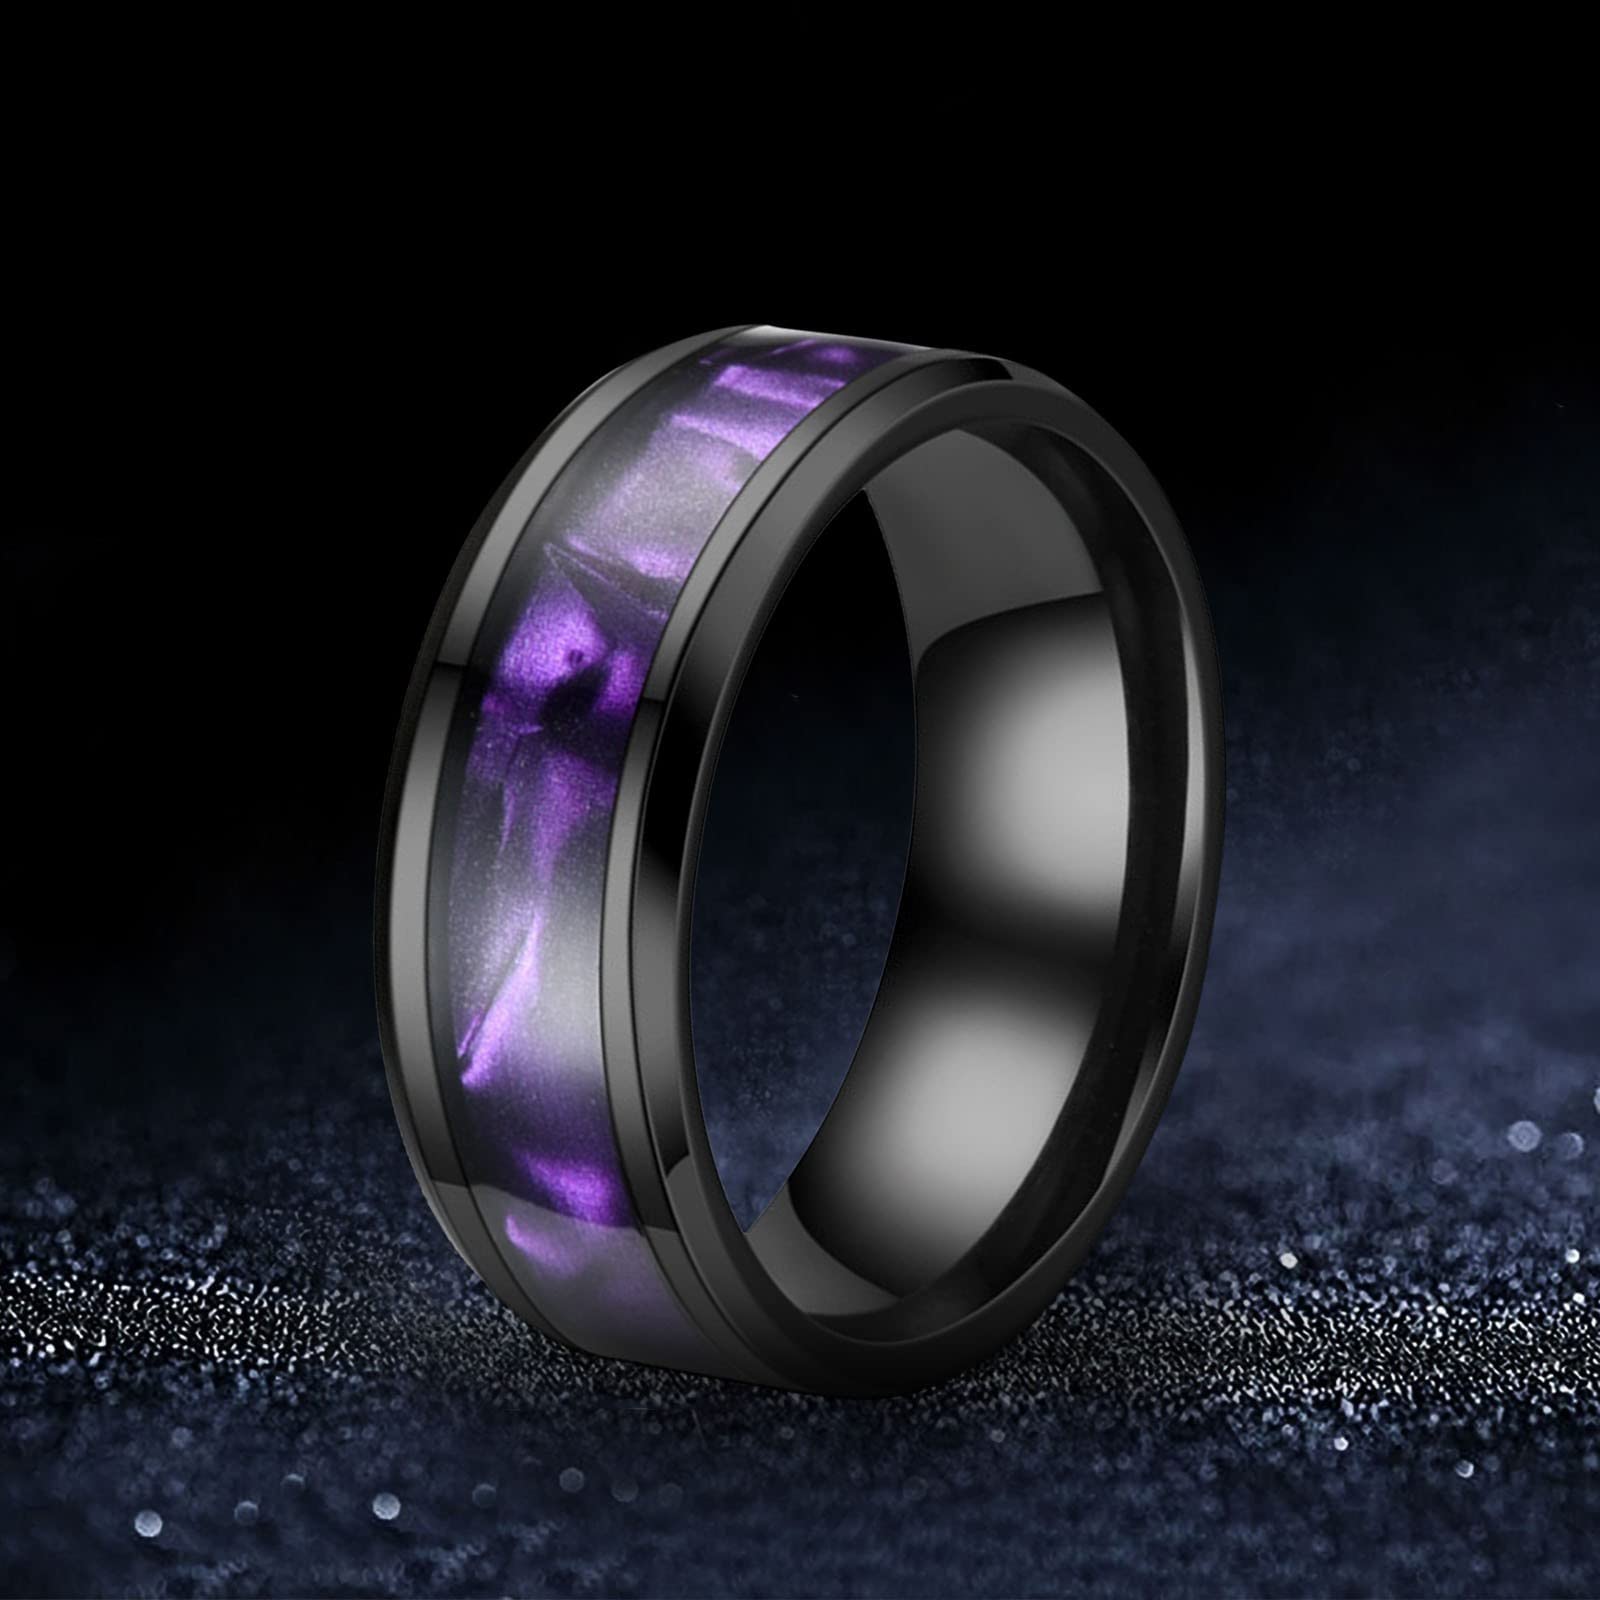 Stainless Steel Anxiety Ring for Women Men Size 6 13 Width 8MM 6 Color Exquisite Ring Black Sand Blasted Finished Silver Rings Sets